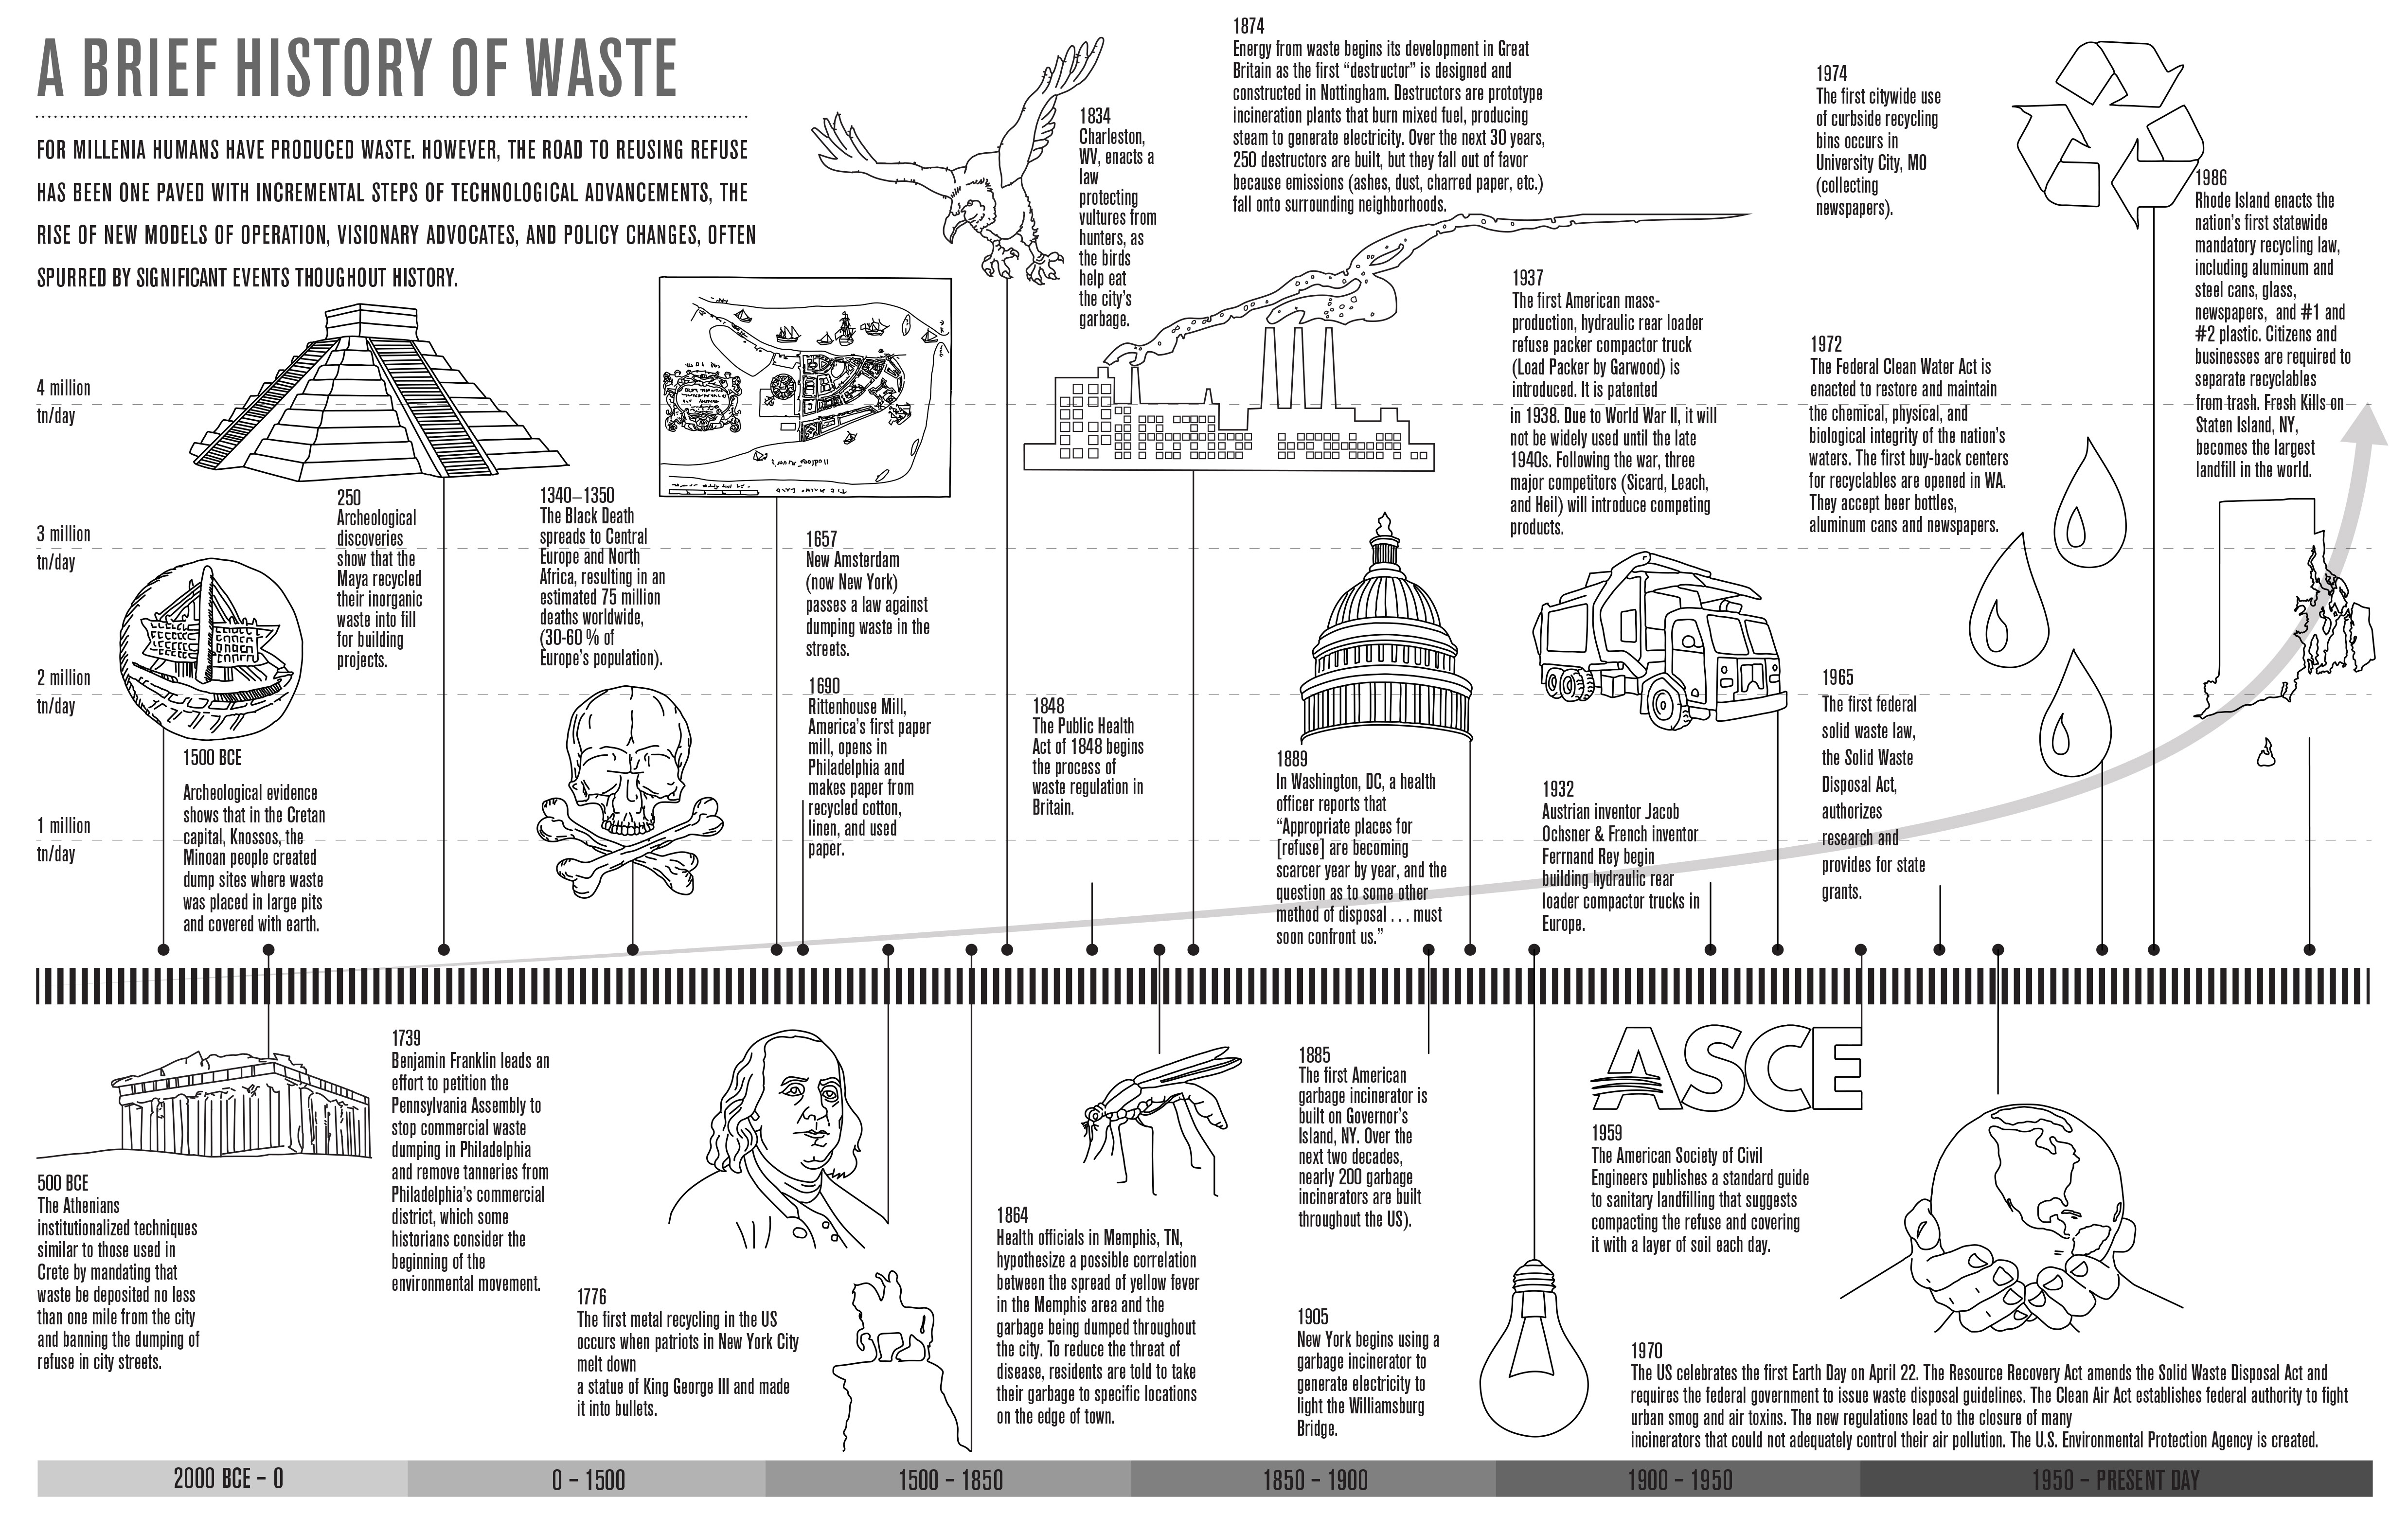 A Brief History of Waste